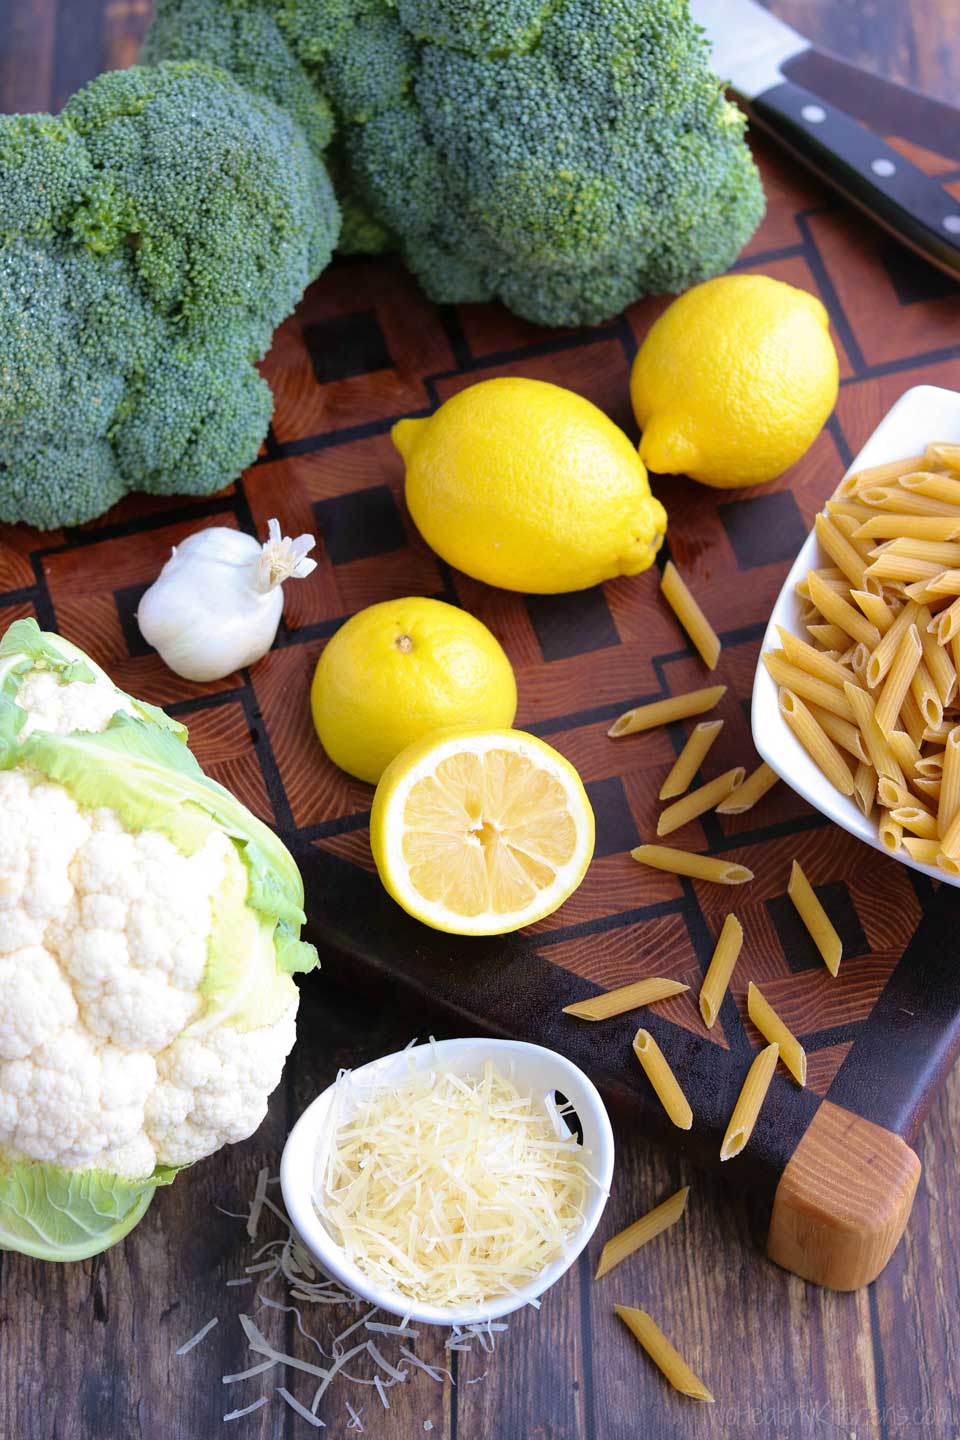 overhead of the ingredients for this recipe, including a head of cauliflower and two bunches of broccoli, several lemons, uncooked penne, a little bowl of parmesan shreds, and a head of garlic